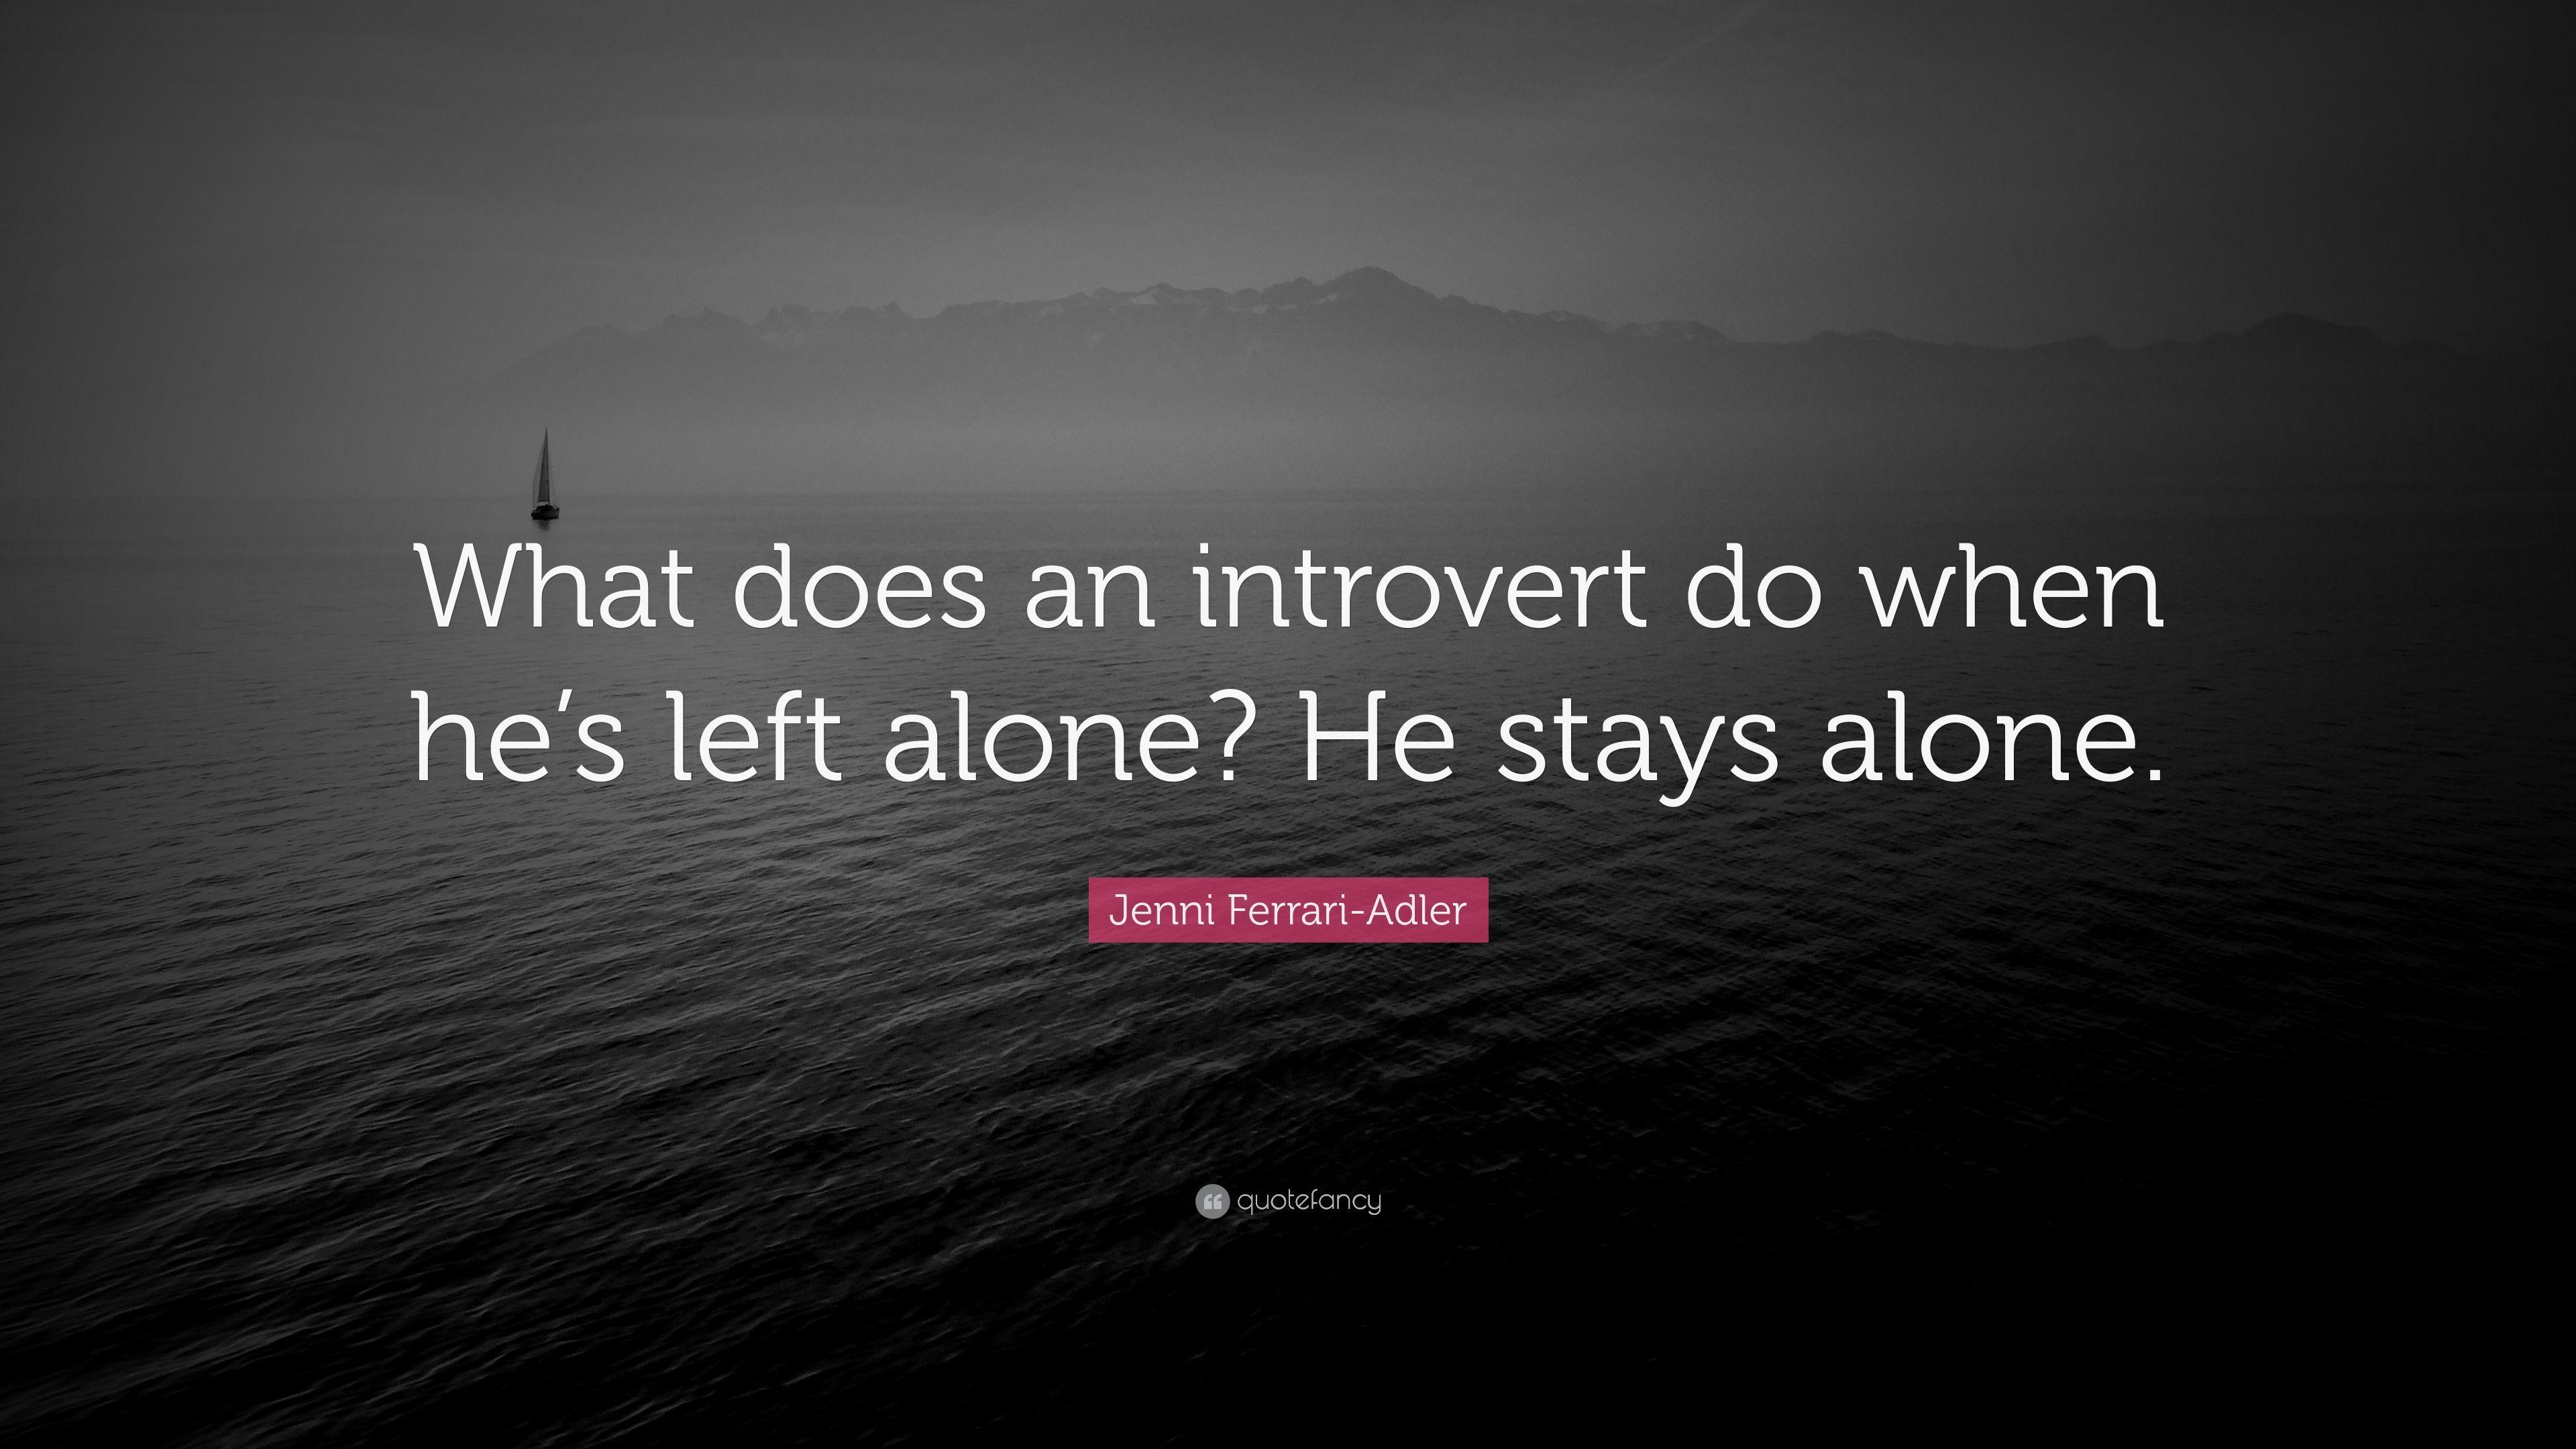 Jenni Ferrari Adler Quote: “What Does An Introvert Do When He's Left